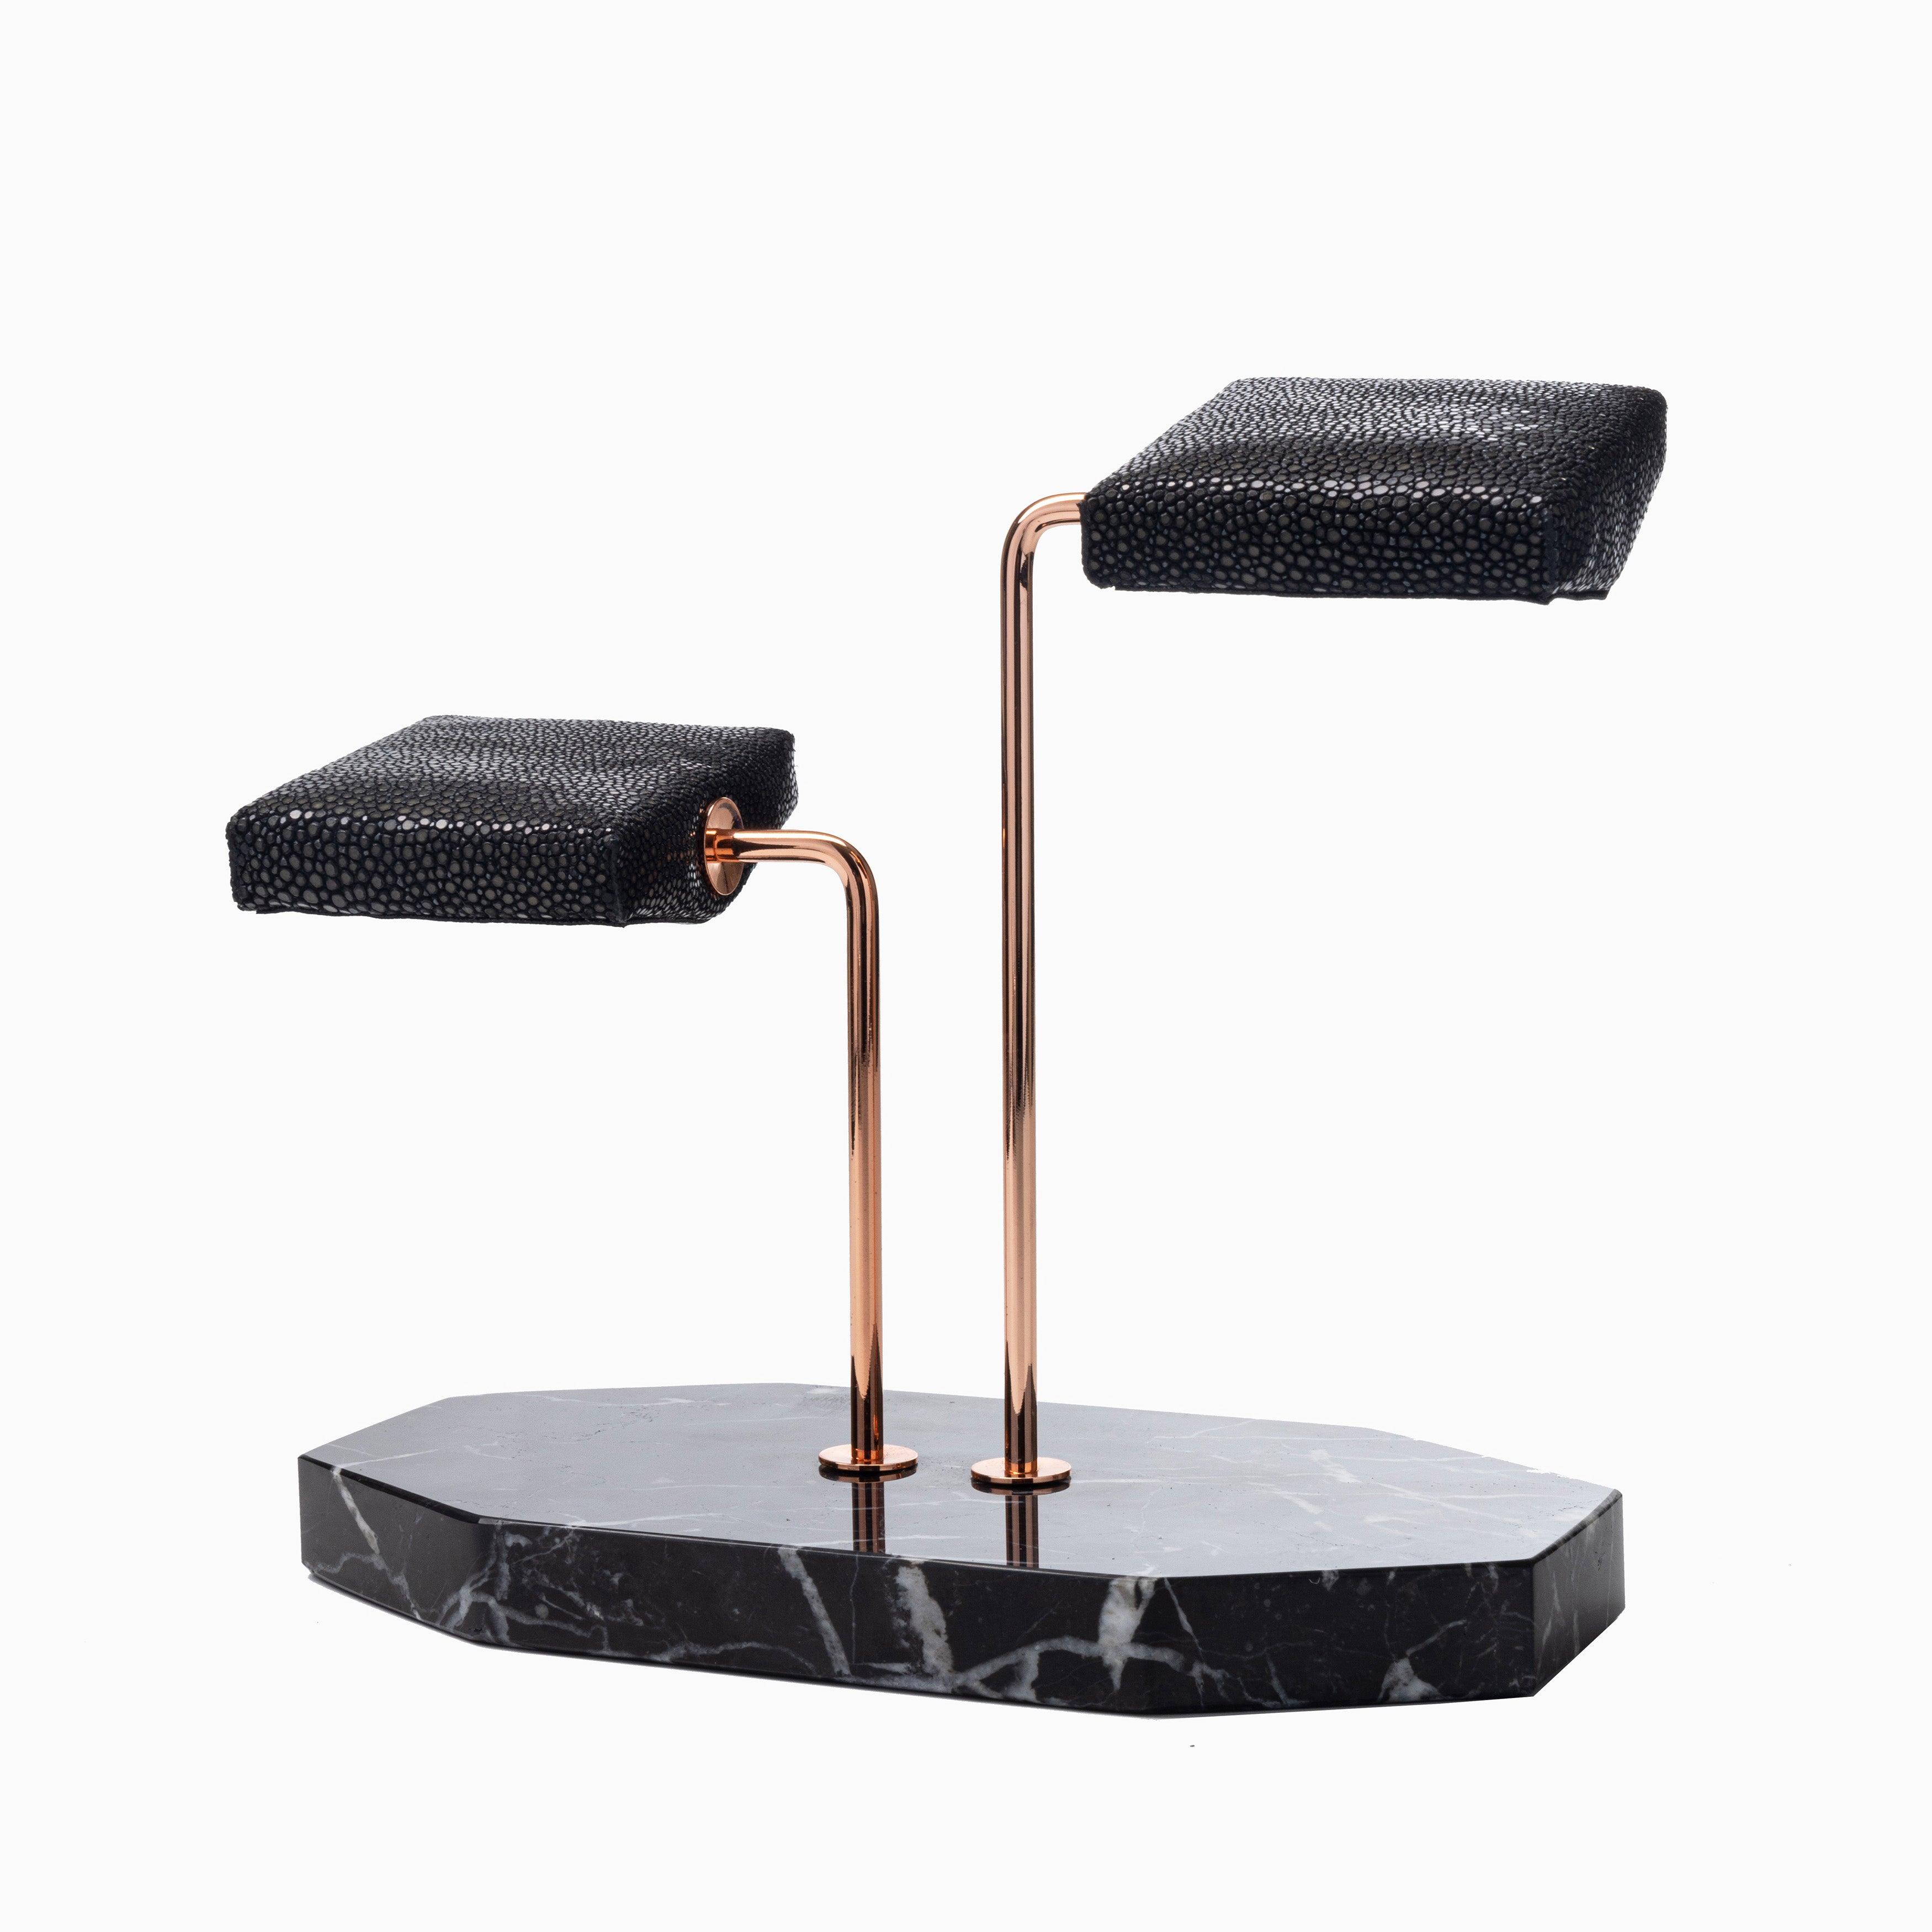 Dual Watch Stand - Black Stingray (Limited Edition)